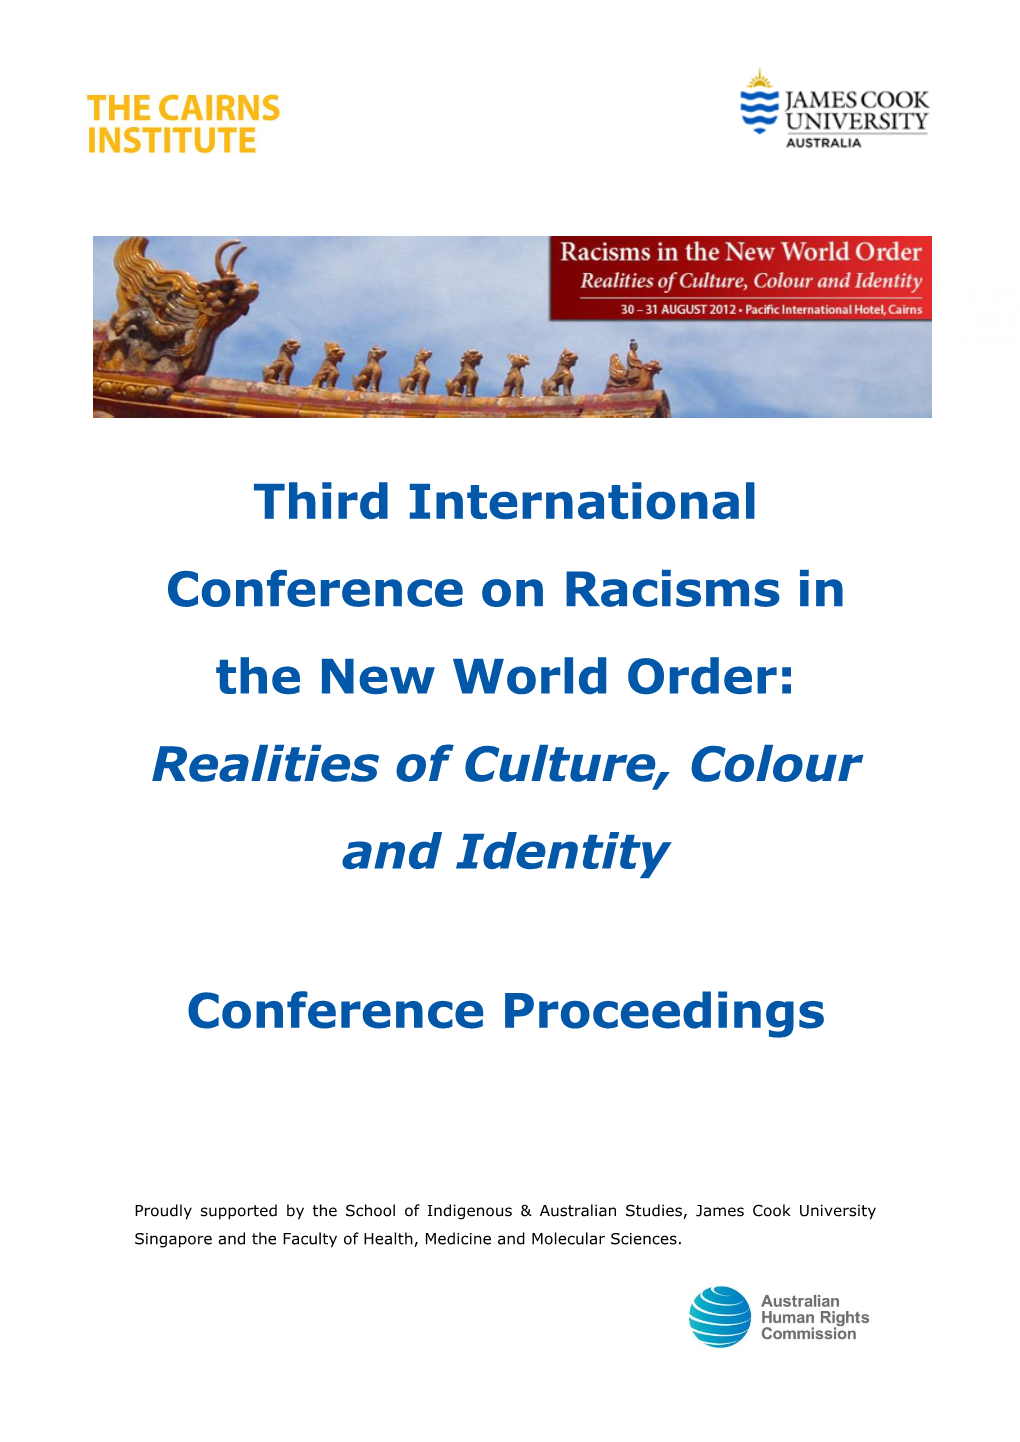 Third International Conference on Racisms in the New World Order: Realities of Culture, Colour and Identity